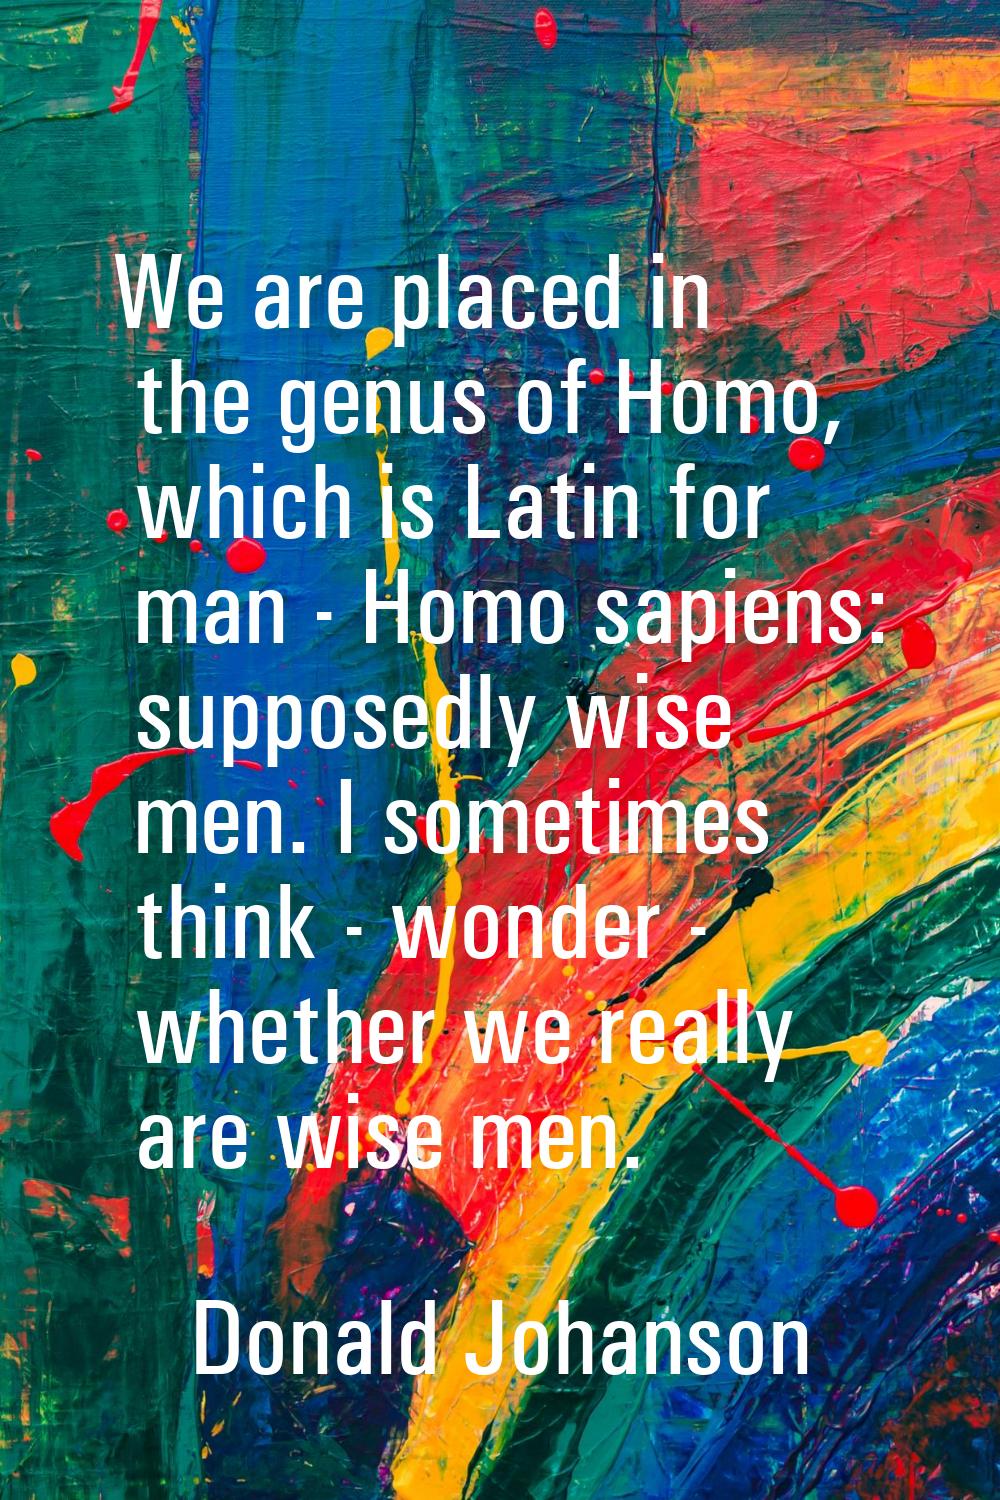 We are placed in the genus of Homo, which is Latin for man - Homo sapiens: supposedly wise men. I s